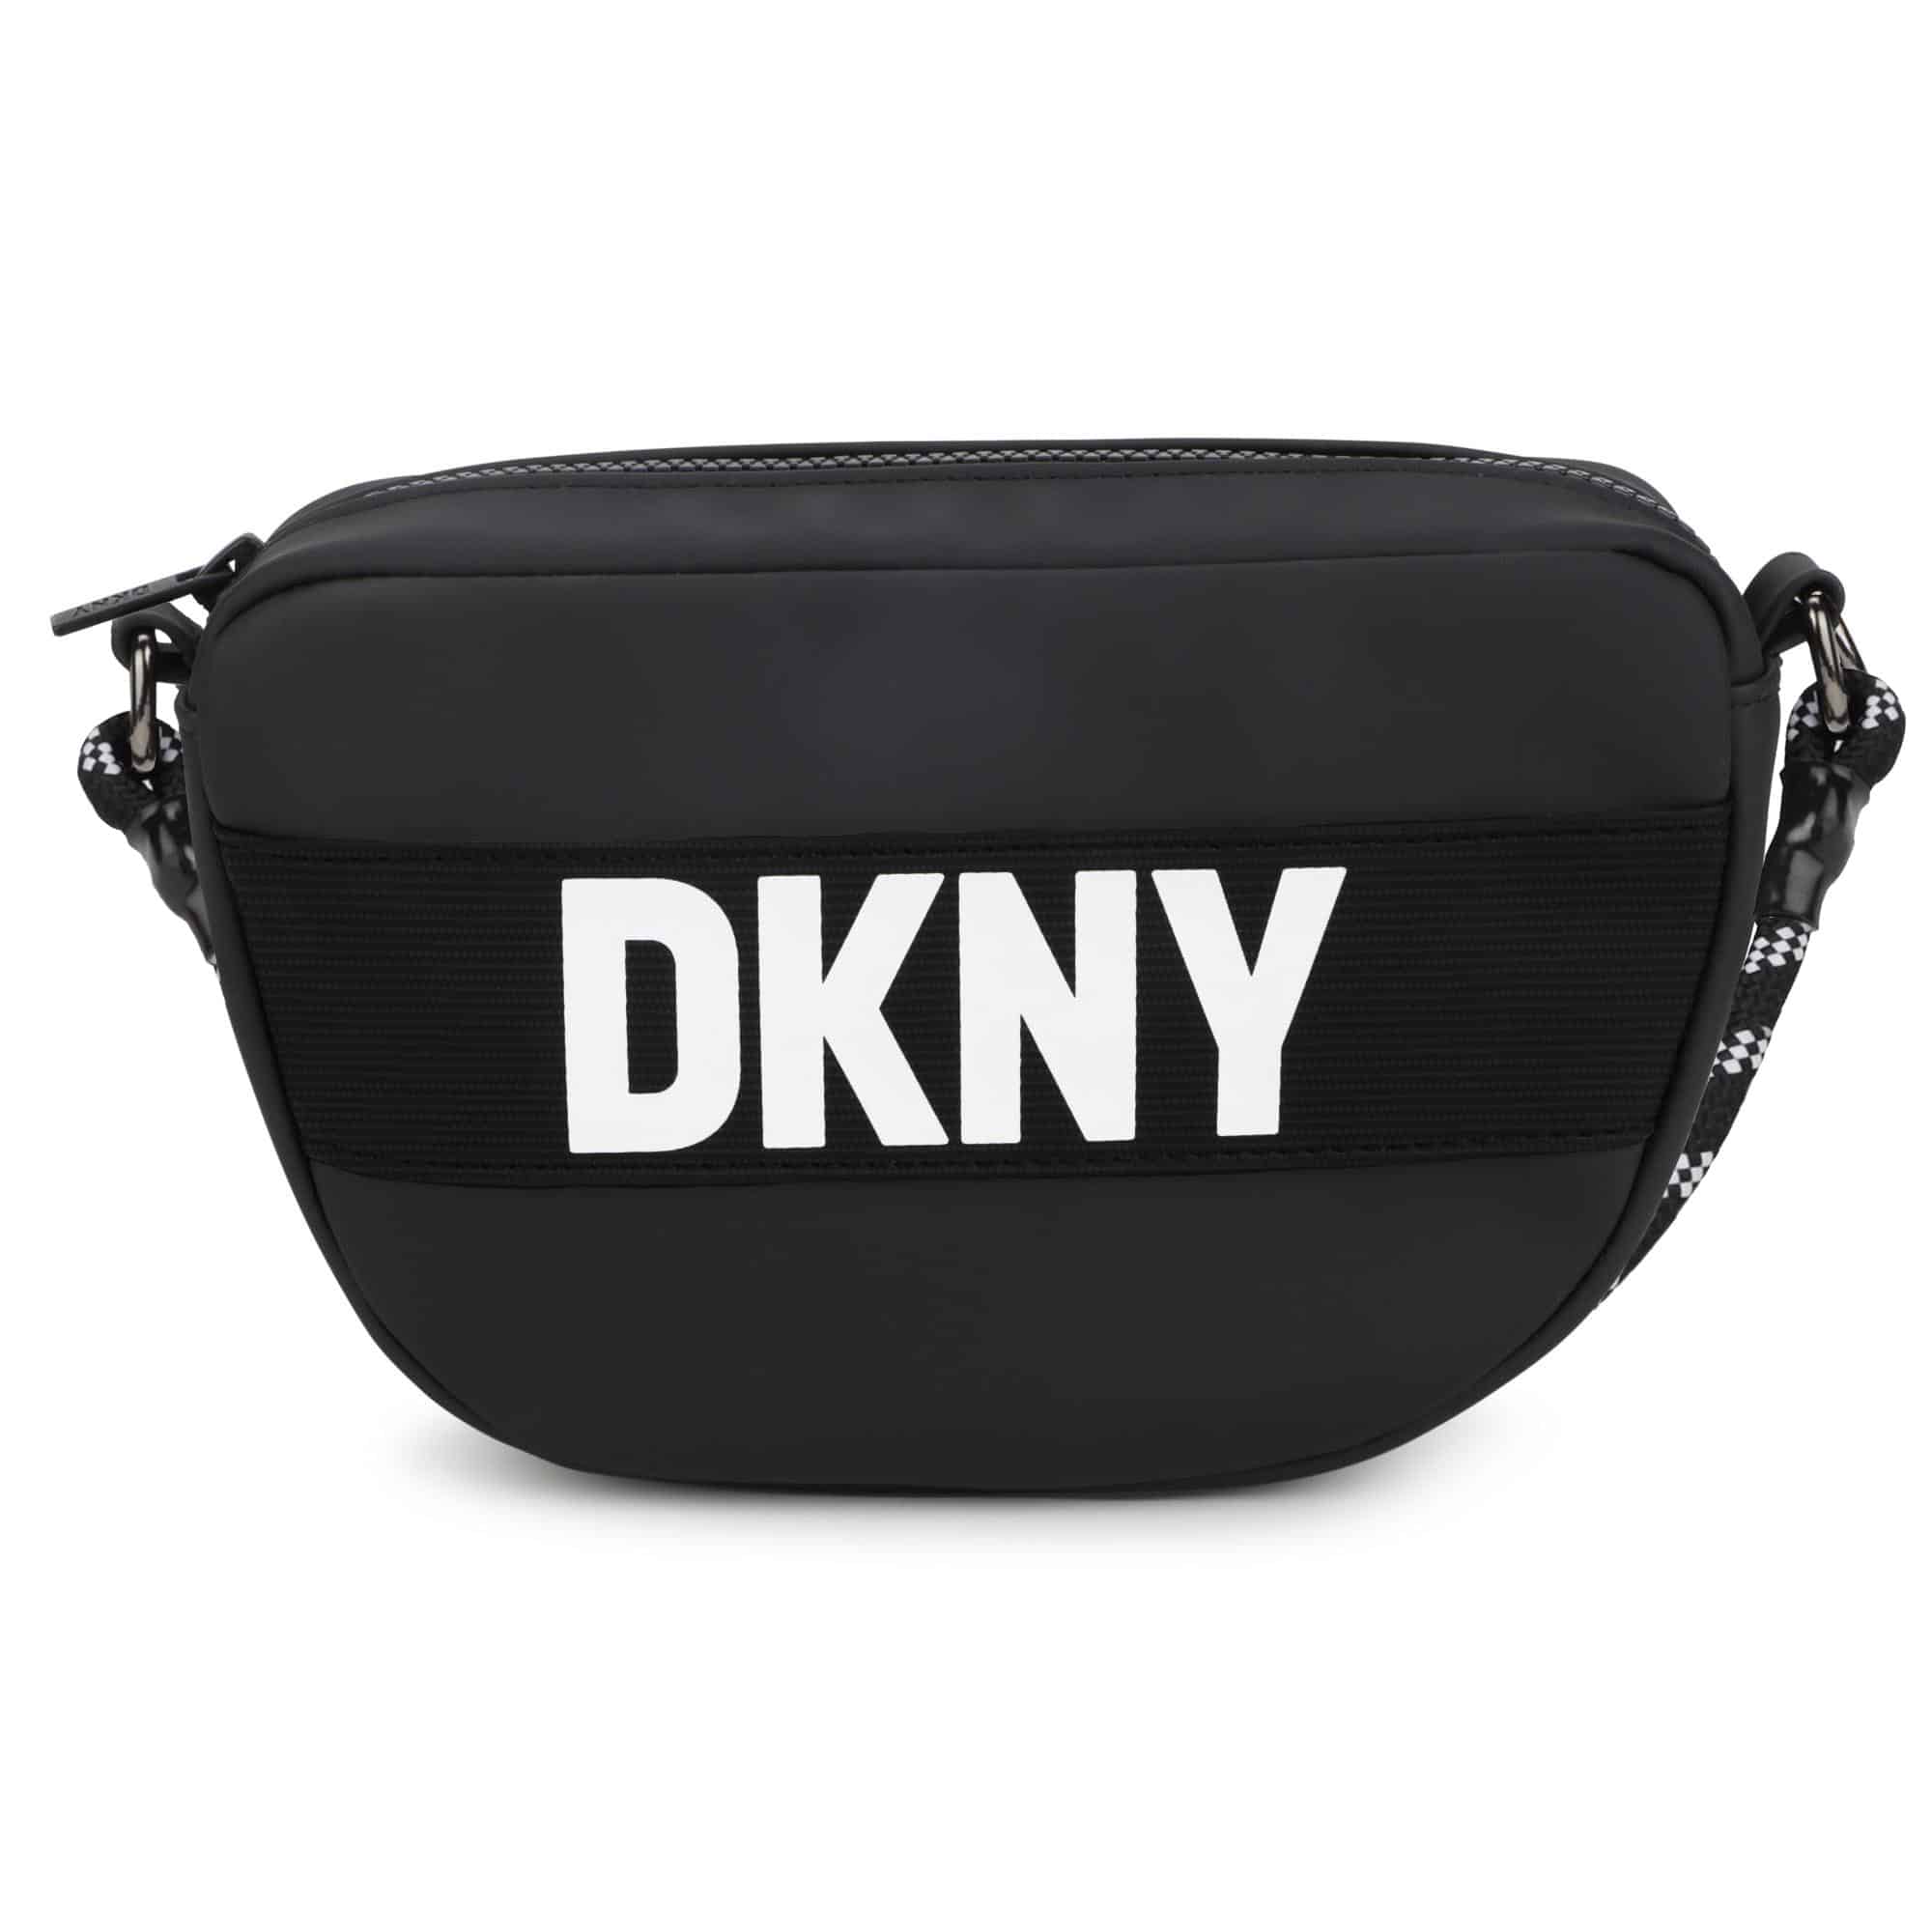 DKNY girls black crossbody bag with white logo front view